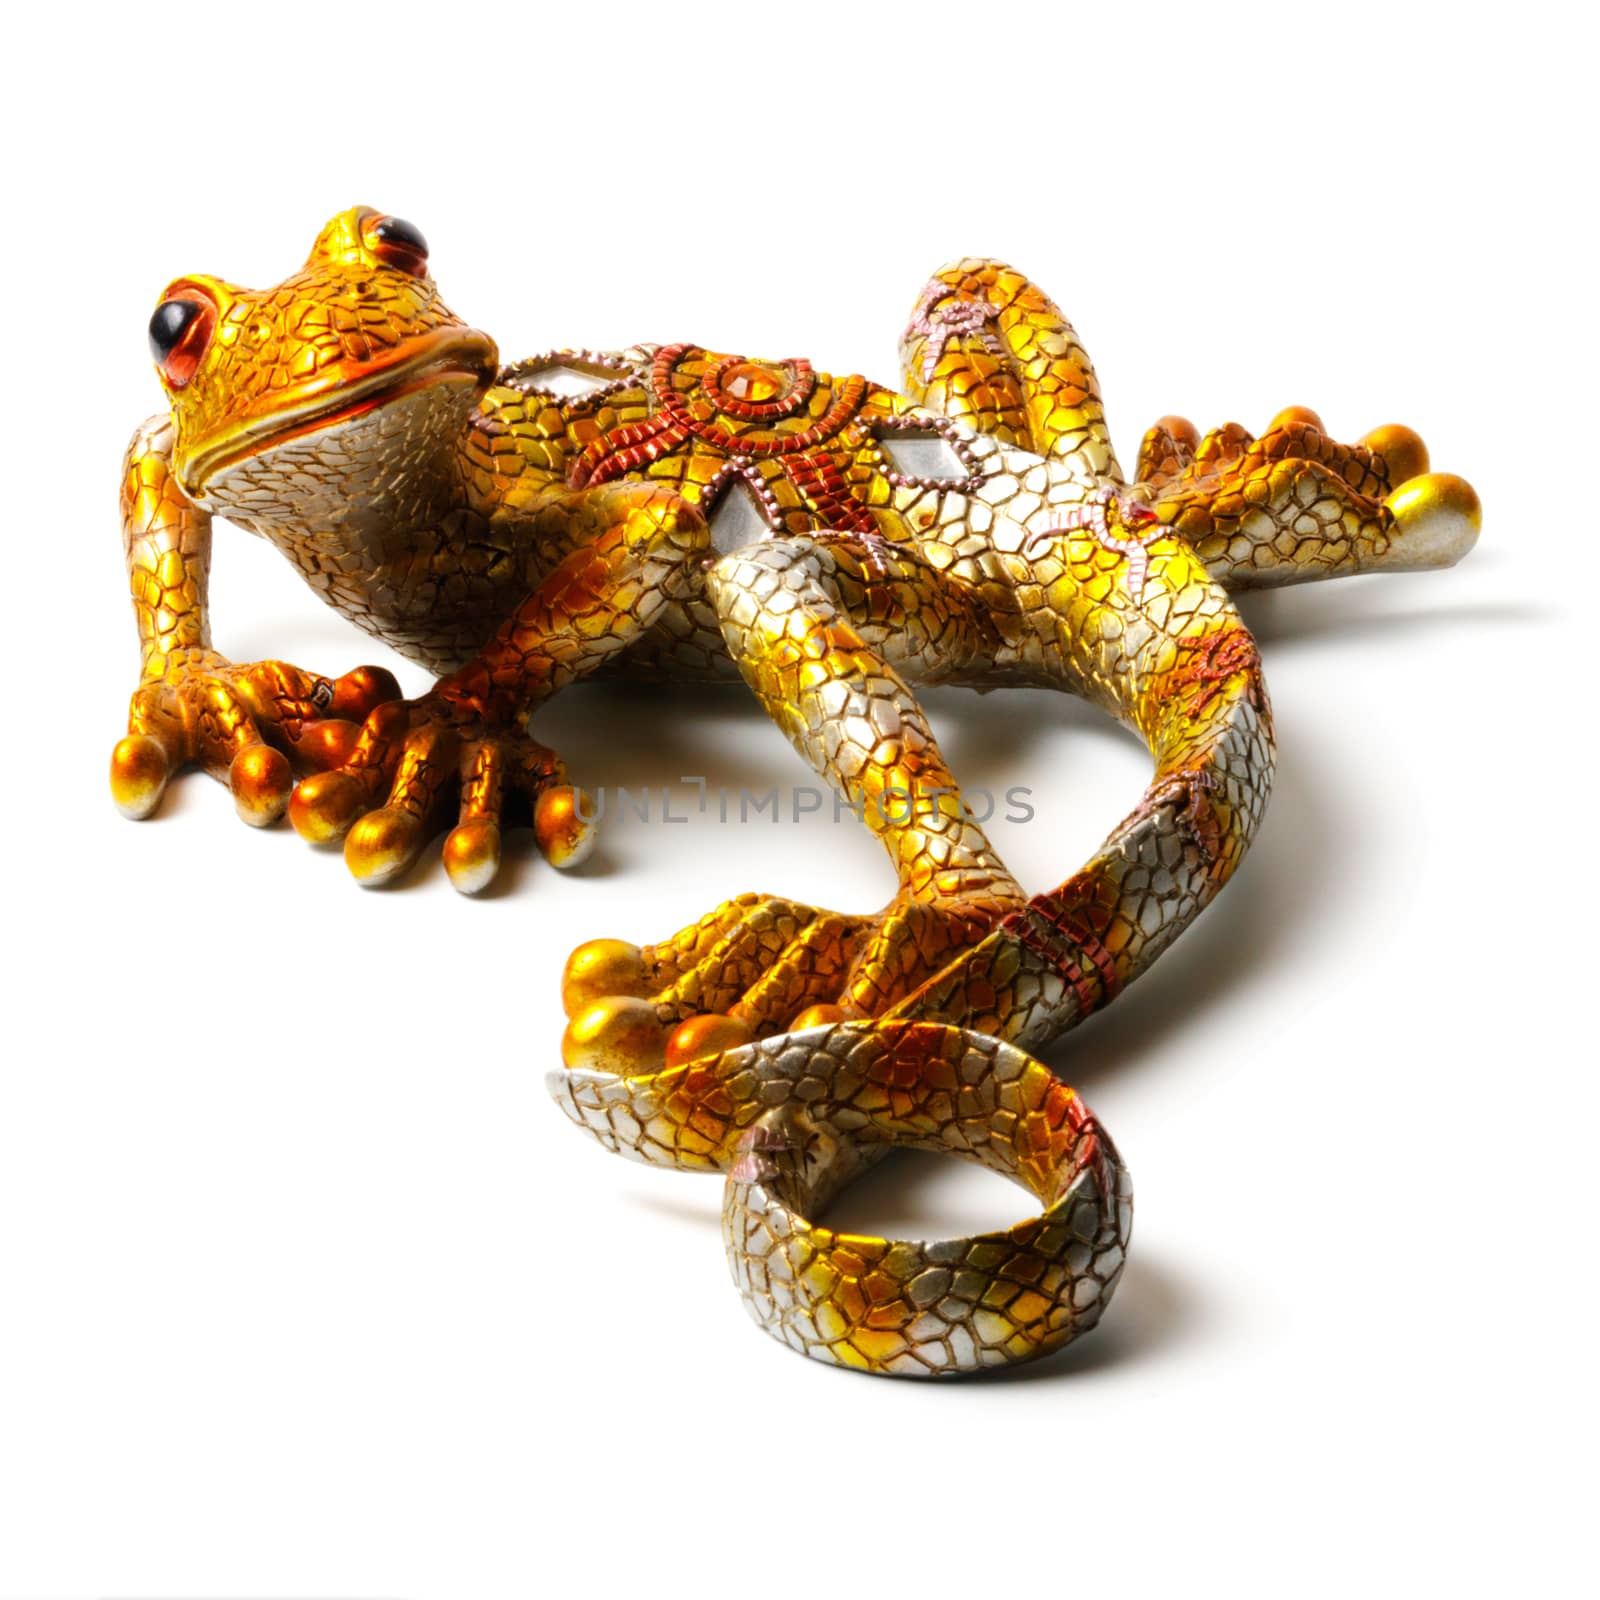 Bright statuette of the lizard isolated on white background